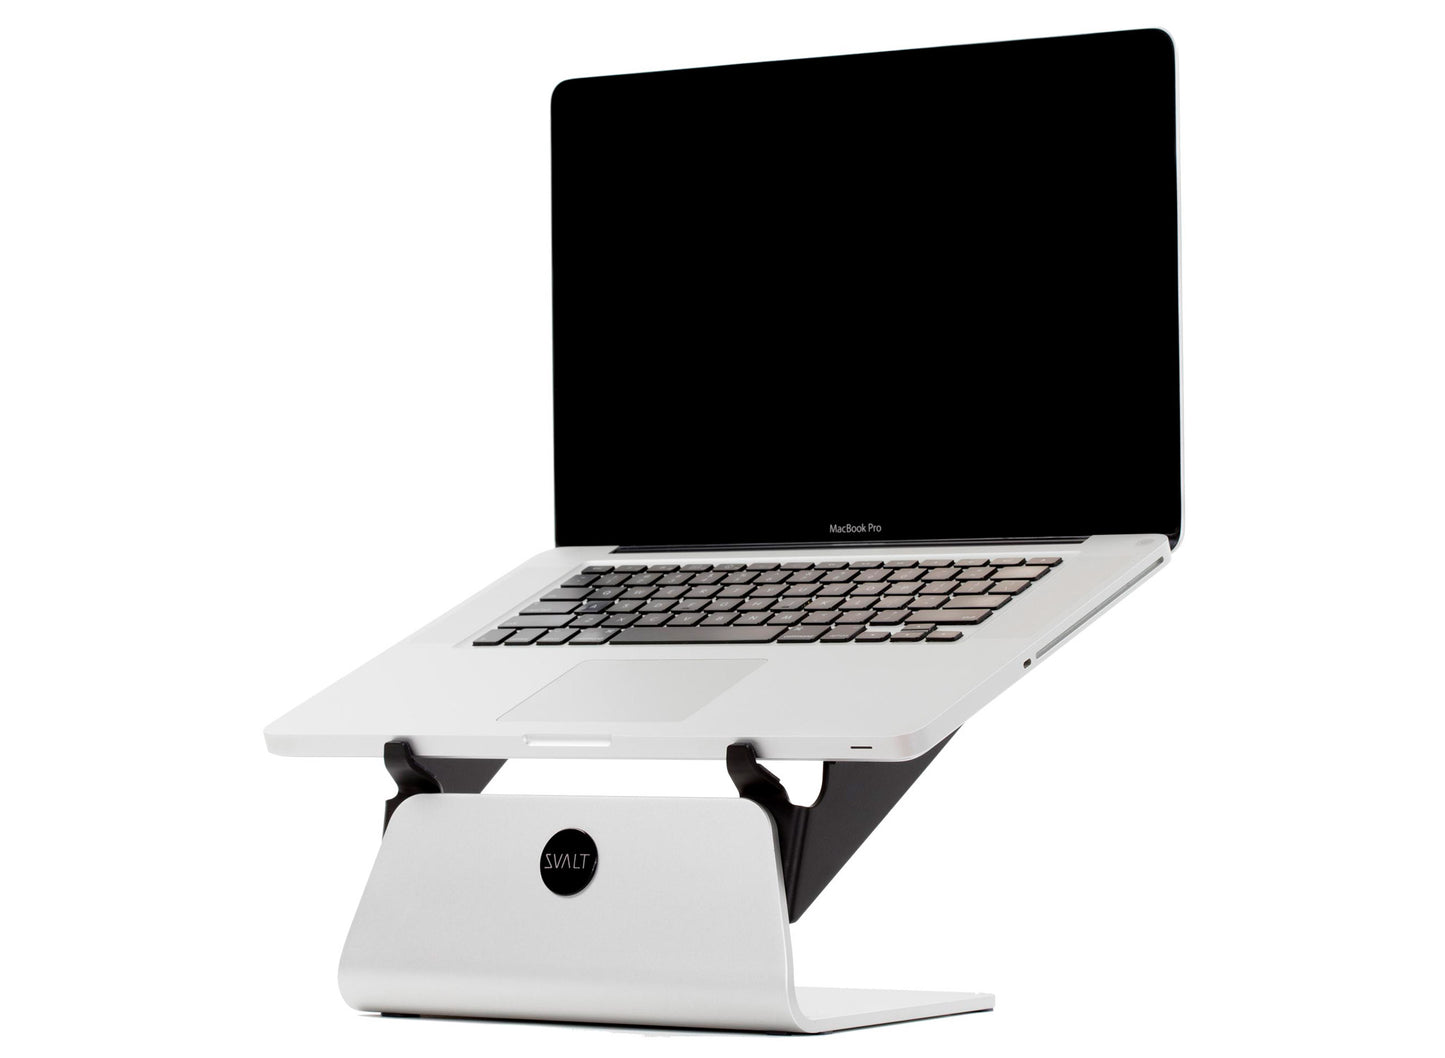 SVALT Cooling Stand model SxN silver front side view for silent passive cooling performance with Apple and PC laptops